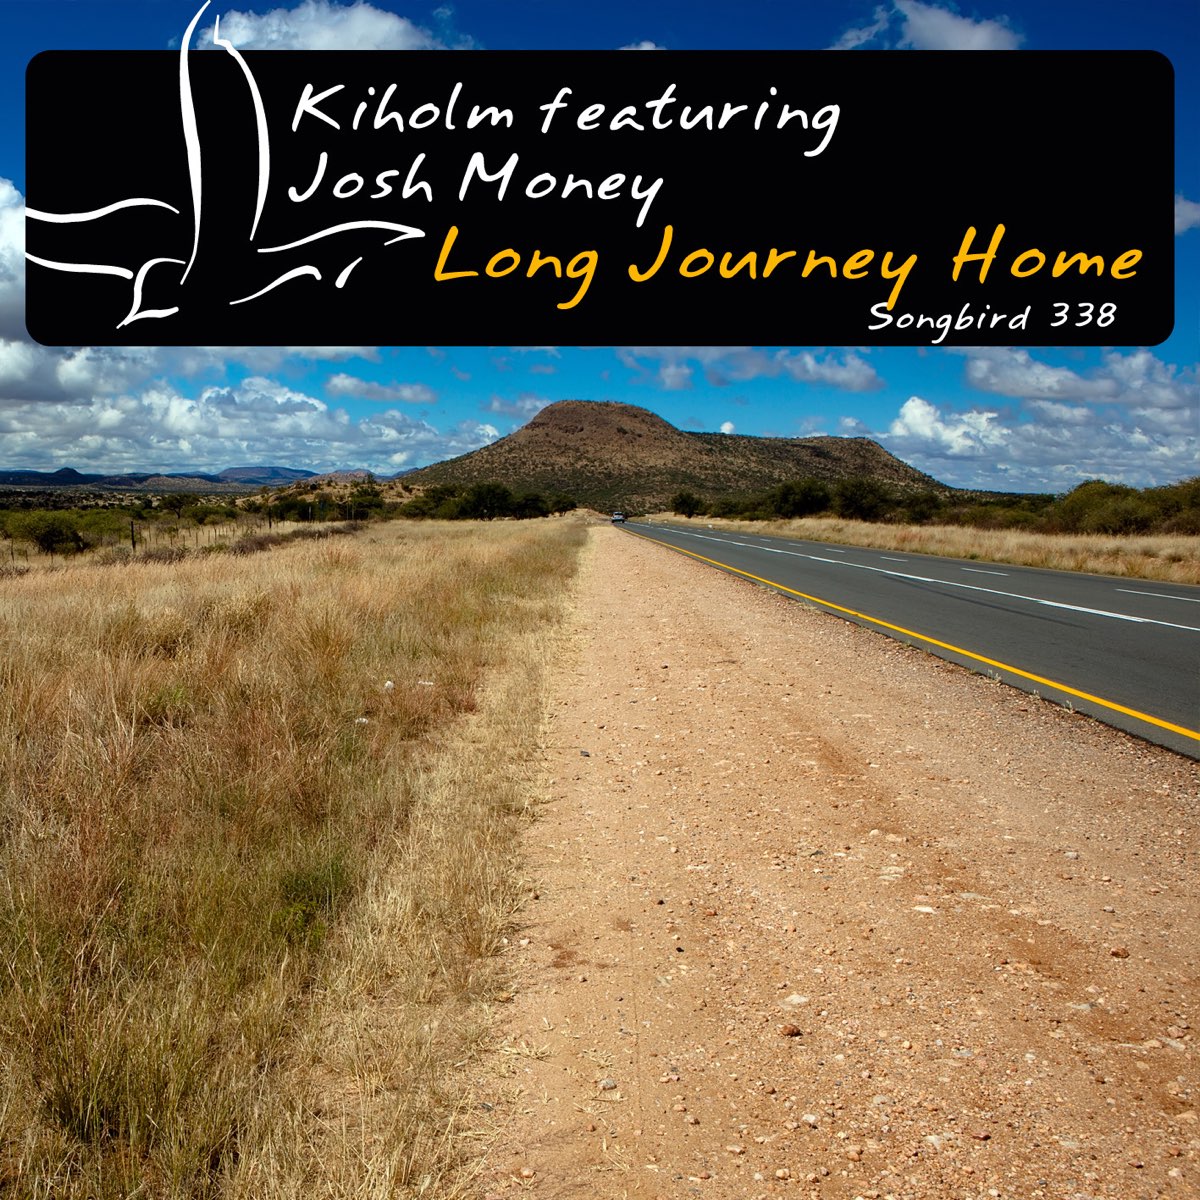 The long Journey Home. Josk. Takes a long journey